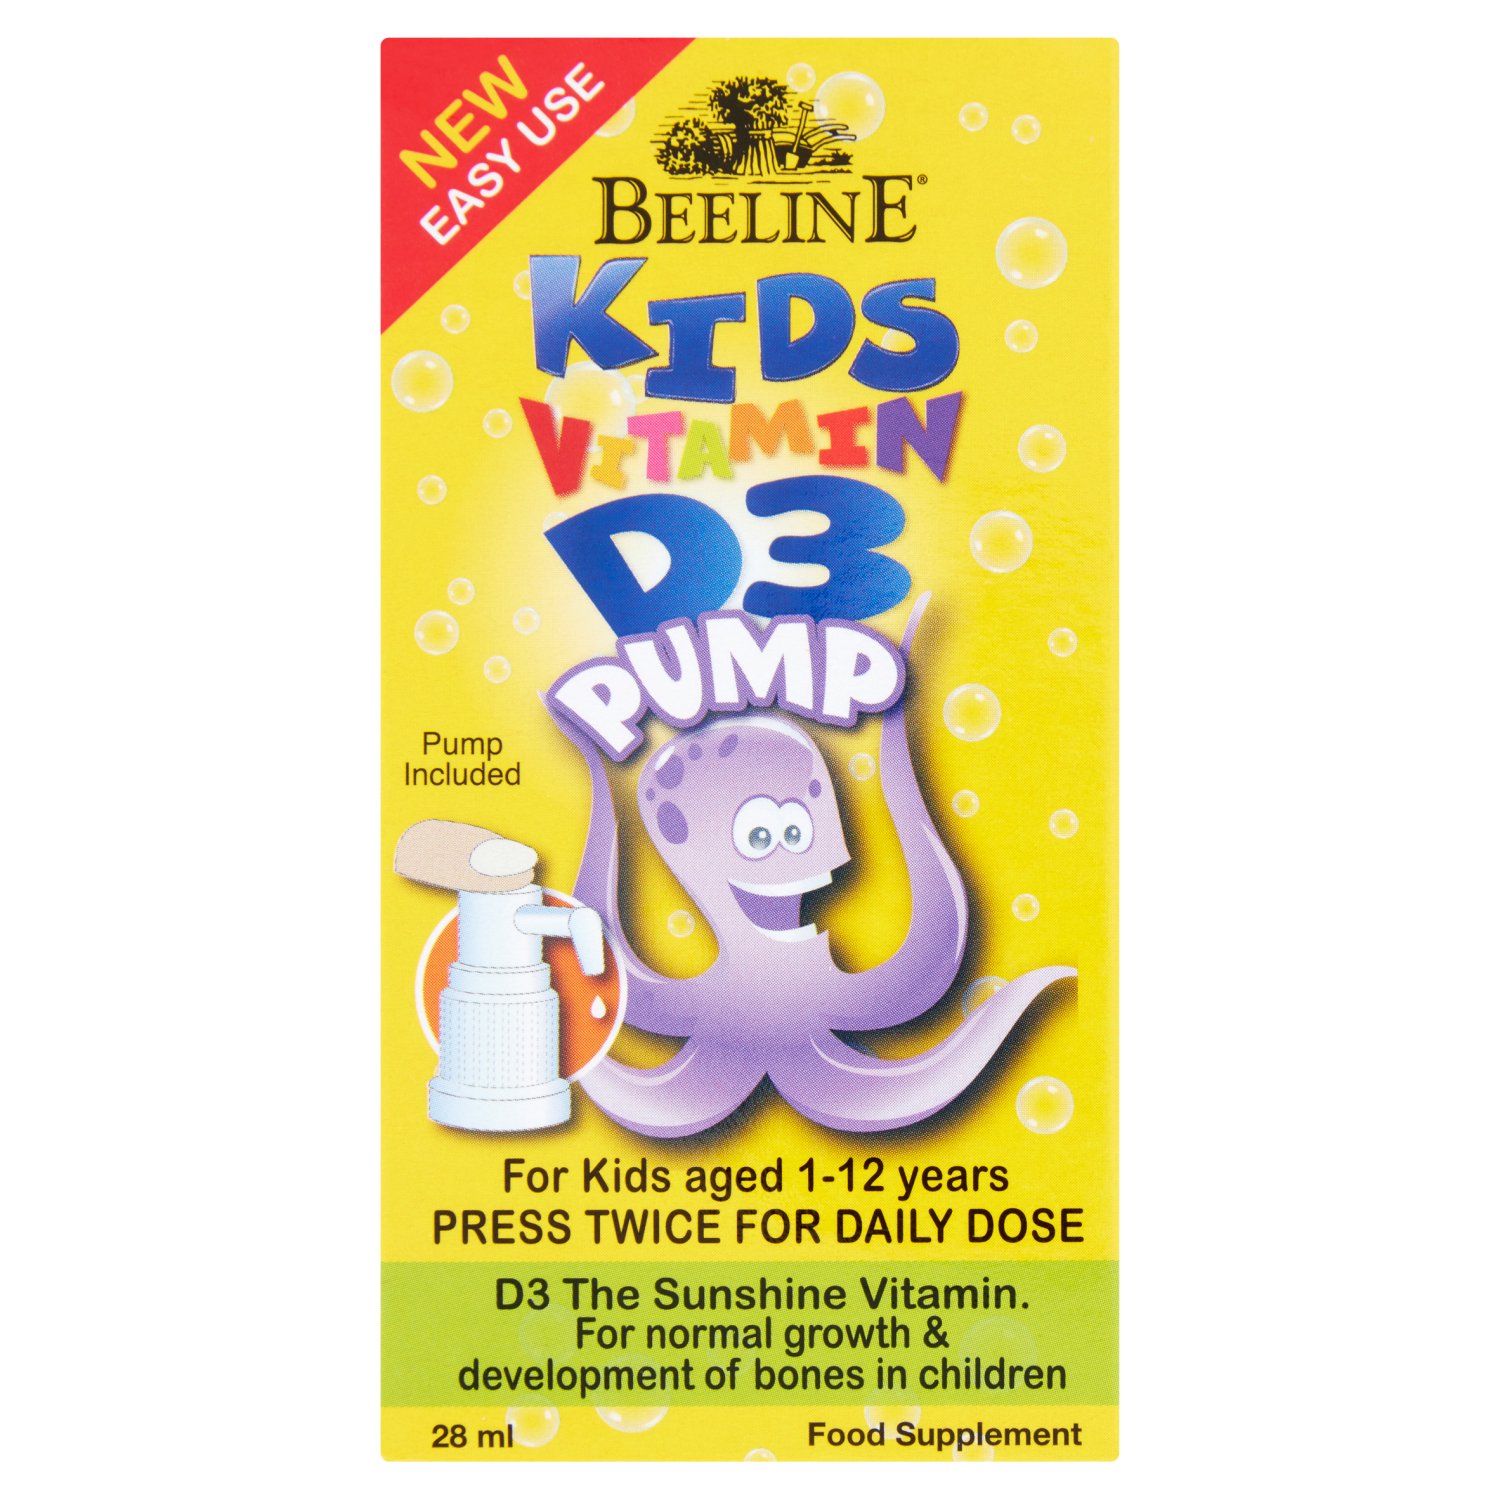 Food Supplement

D3 The Sunshine Vitamin.
For normal growth & development of bones in children

Beeline Kids Vitamin D3 pump has been designed specifically for children aged 1-12 years. Vitamin D is made in the skin by sunshine. In Ireland and the U.K sunshine is less available especially in winter so little Vitamin D is produced. As kids should not be exposed to excessive sunshine Beeline Vitamin D3 is a great way to ensure your child gets the Vitamin D3 it needs.